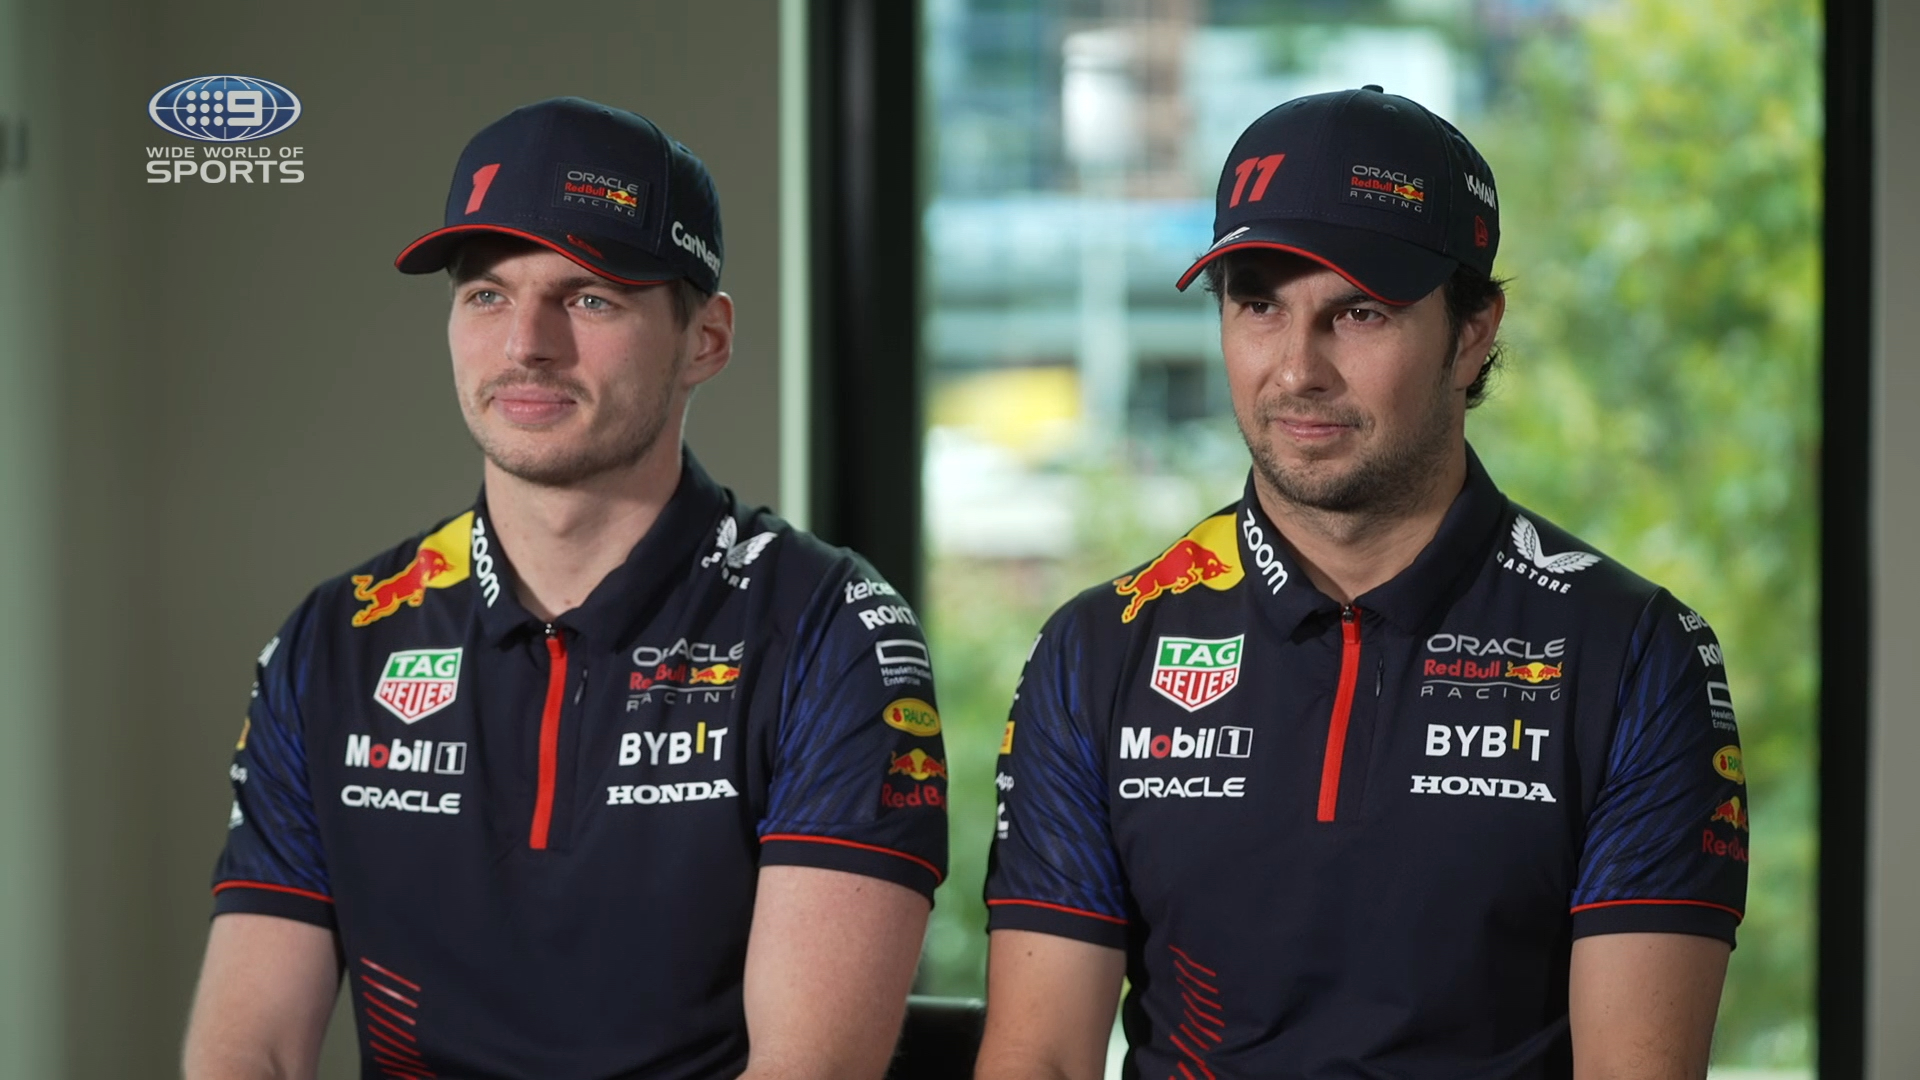 'That’s sports. It’s a normal thing': Simmering tensions at Red Bull